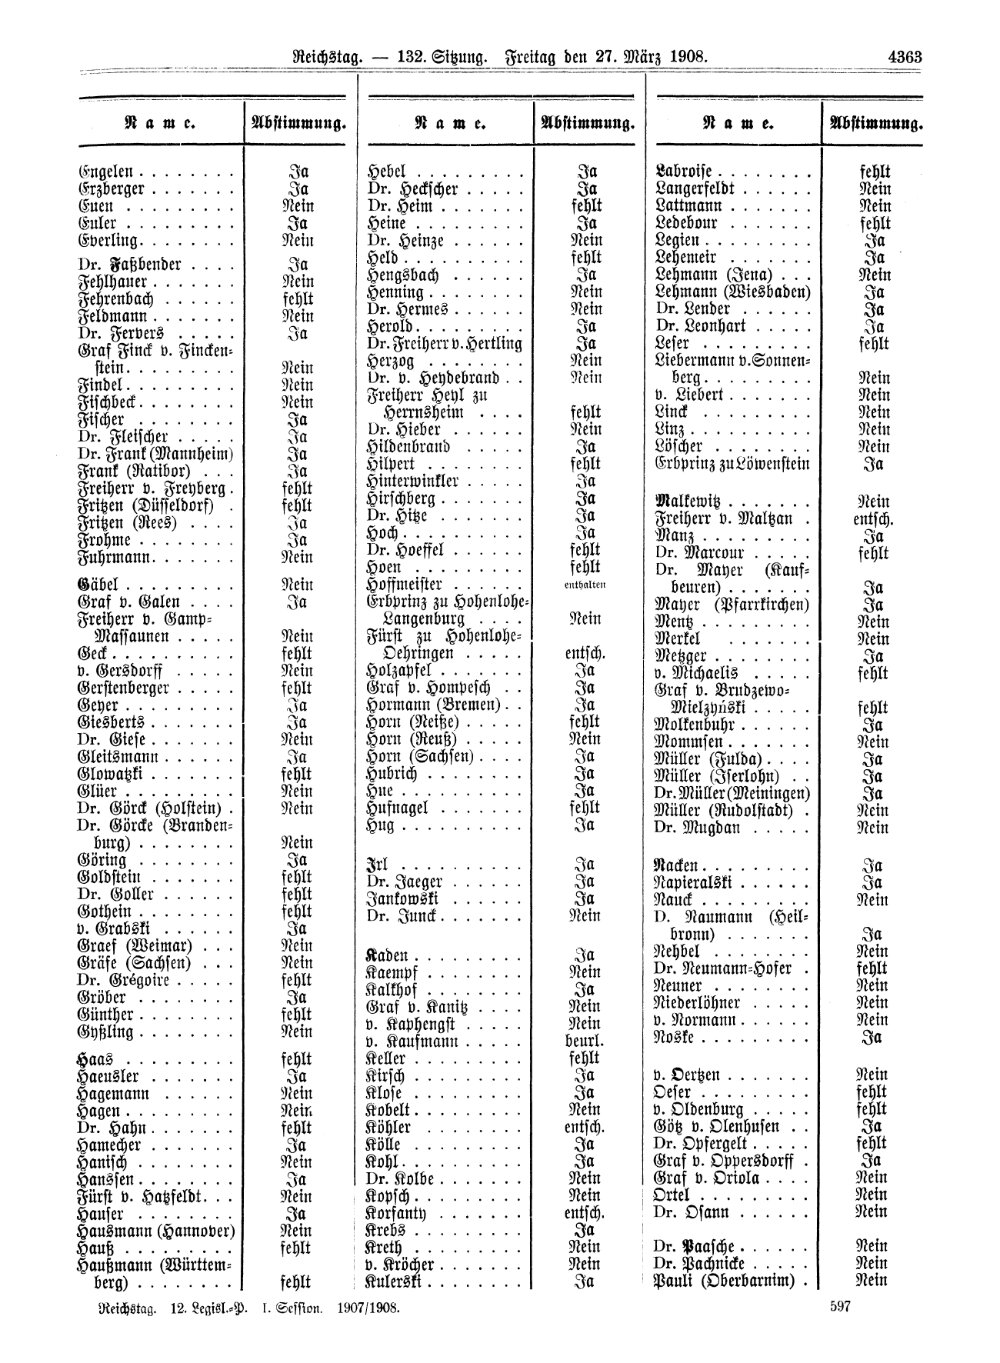 Scan of page 4363